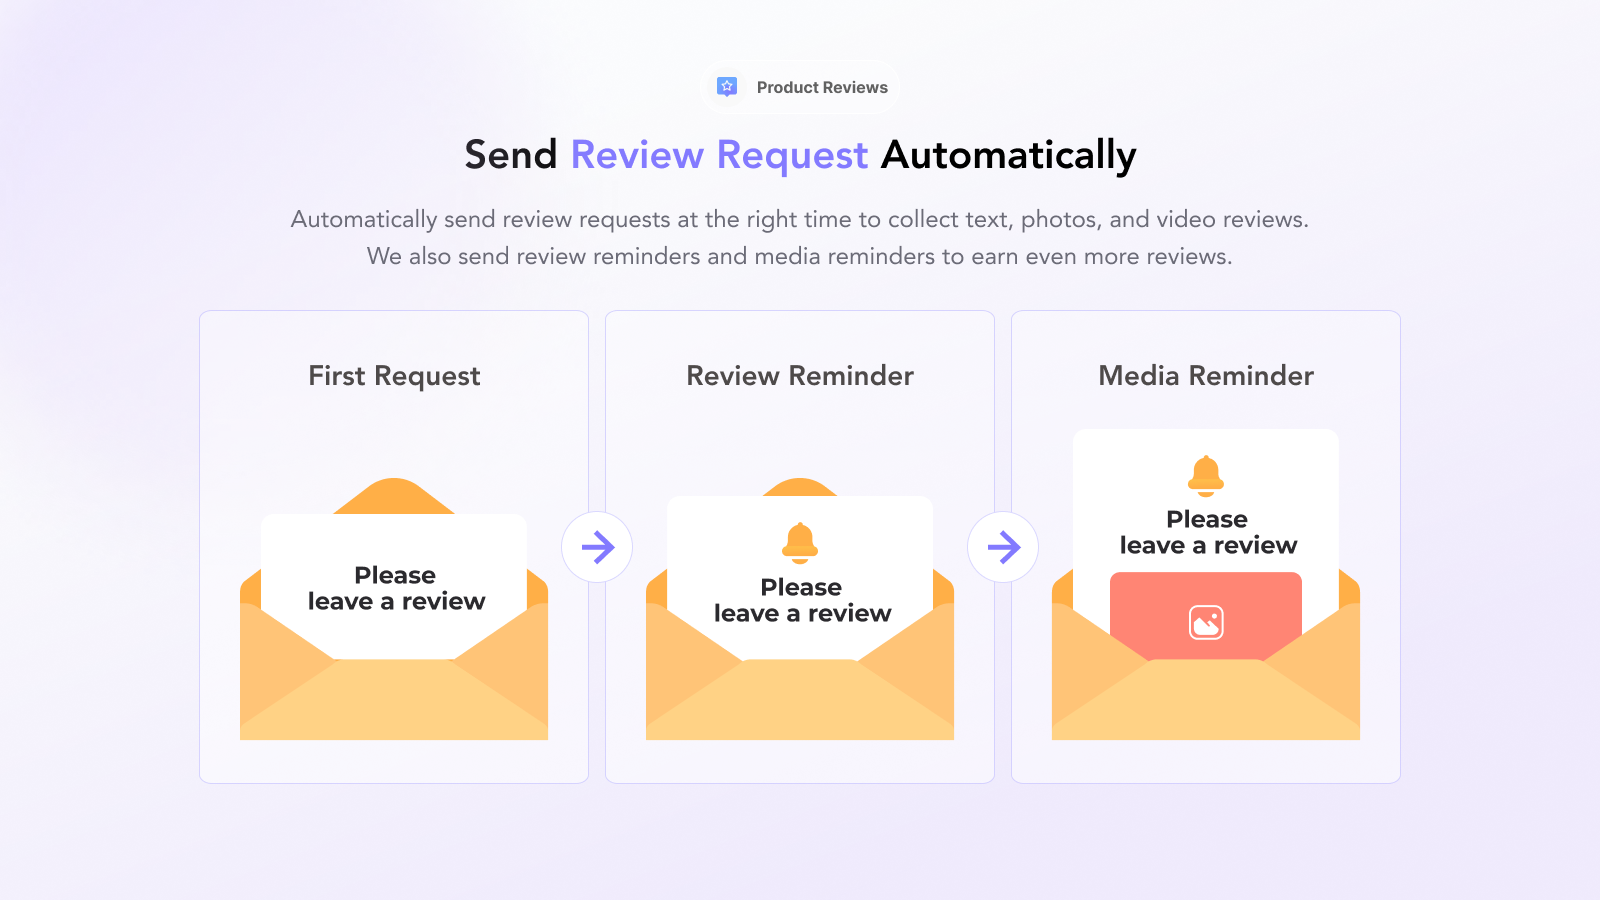 Send Review Request Automatically